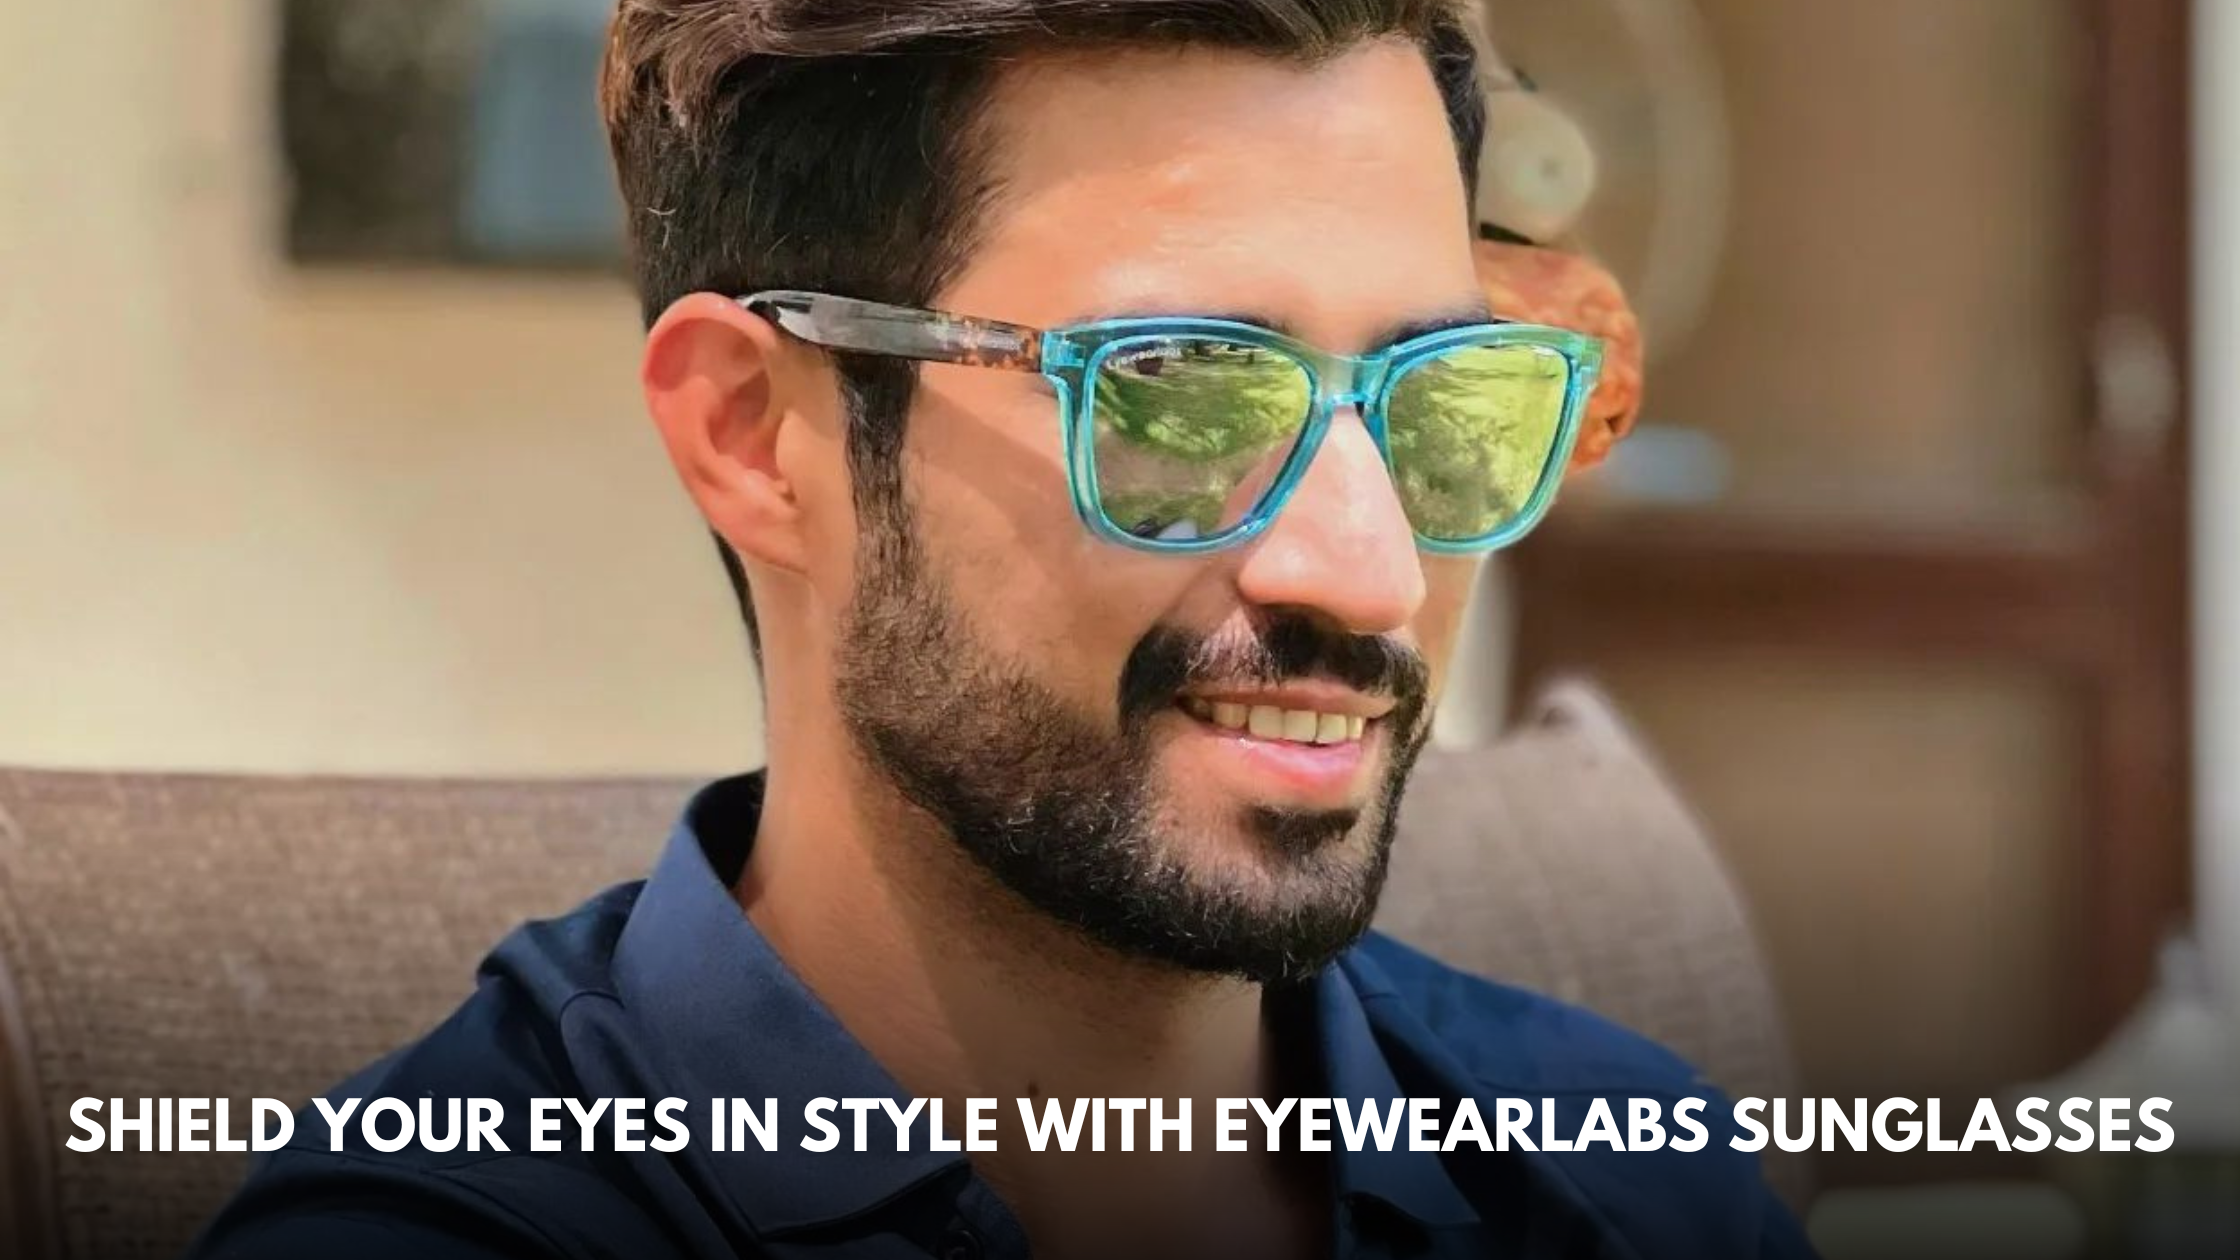 Shield Your Eyes in Style With Eyewearlabs Sunglasses